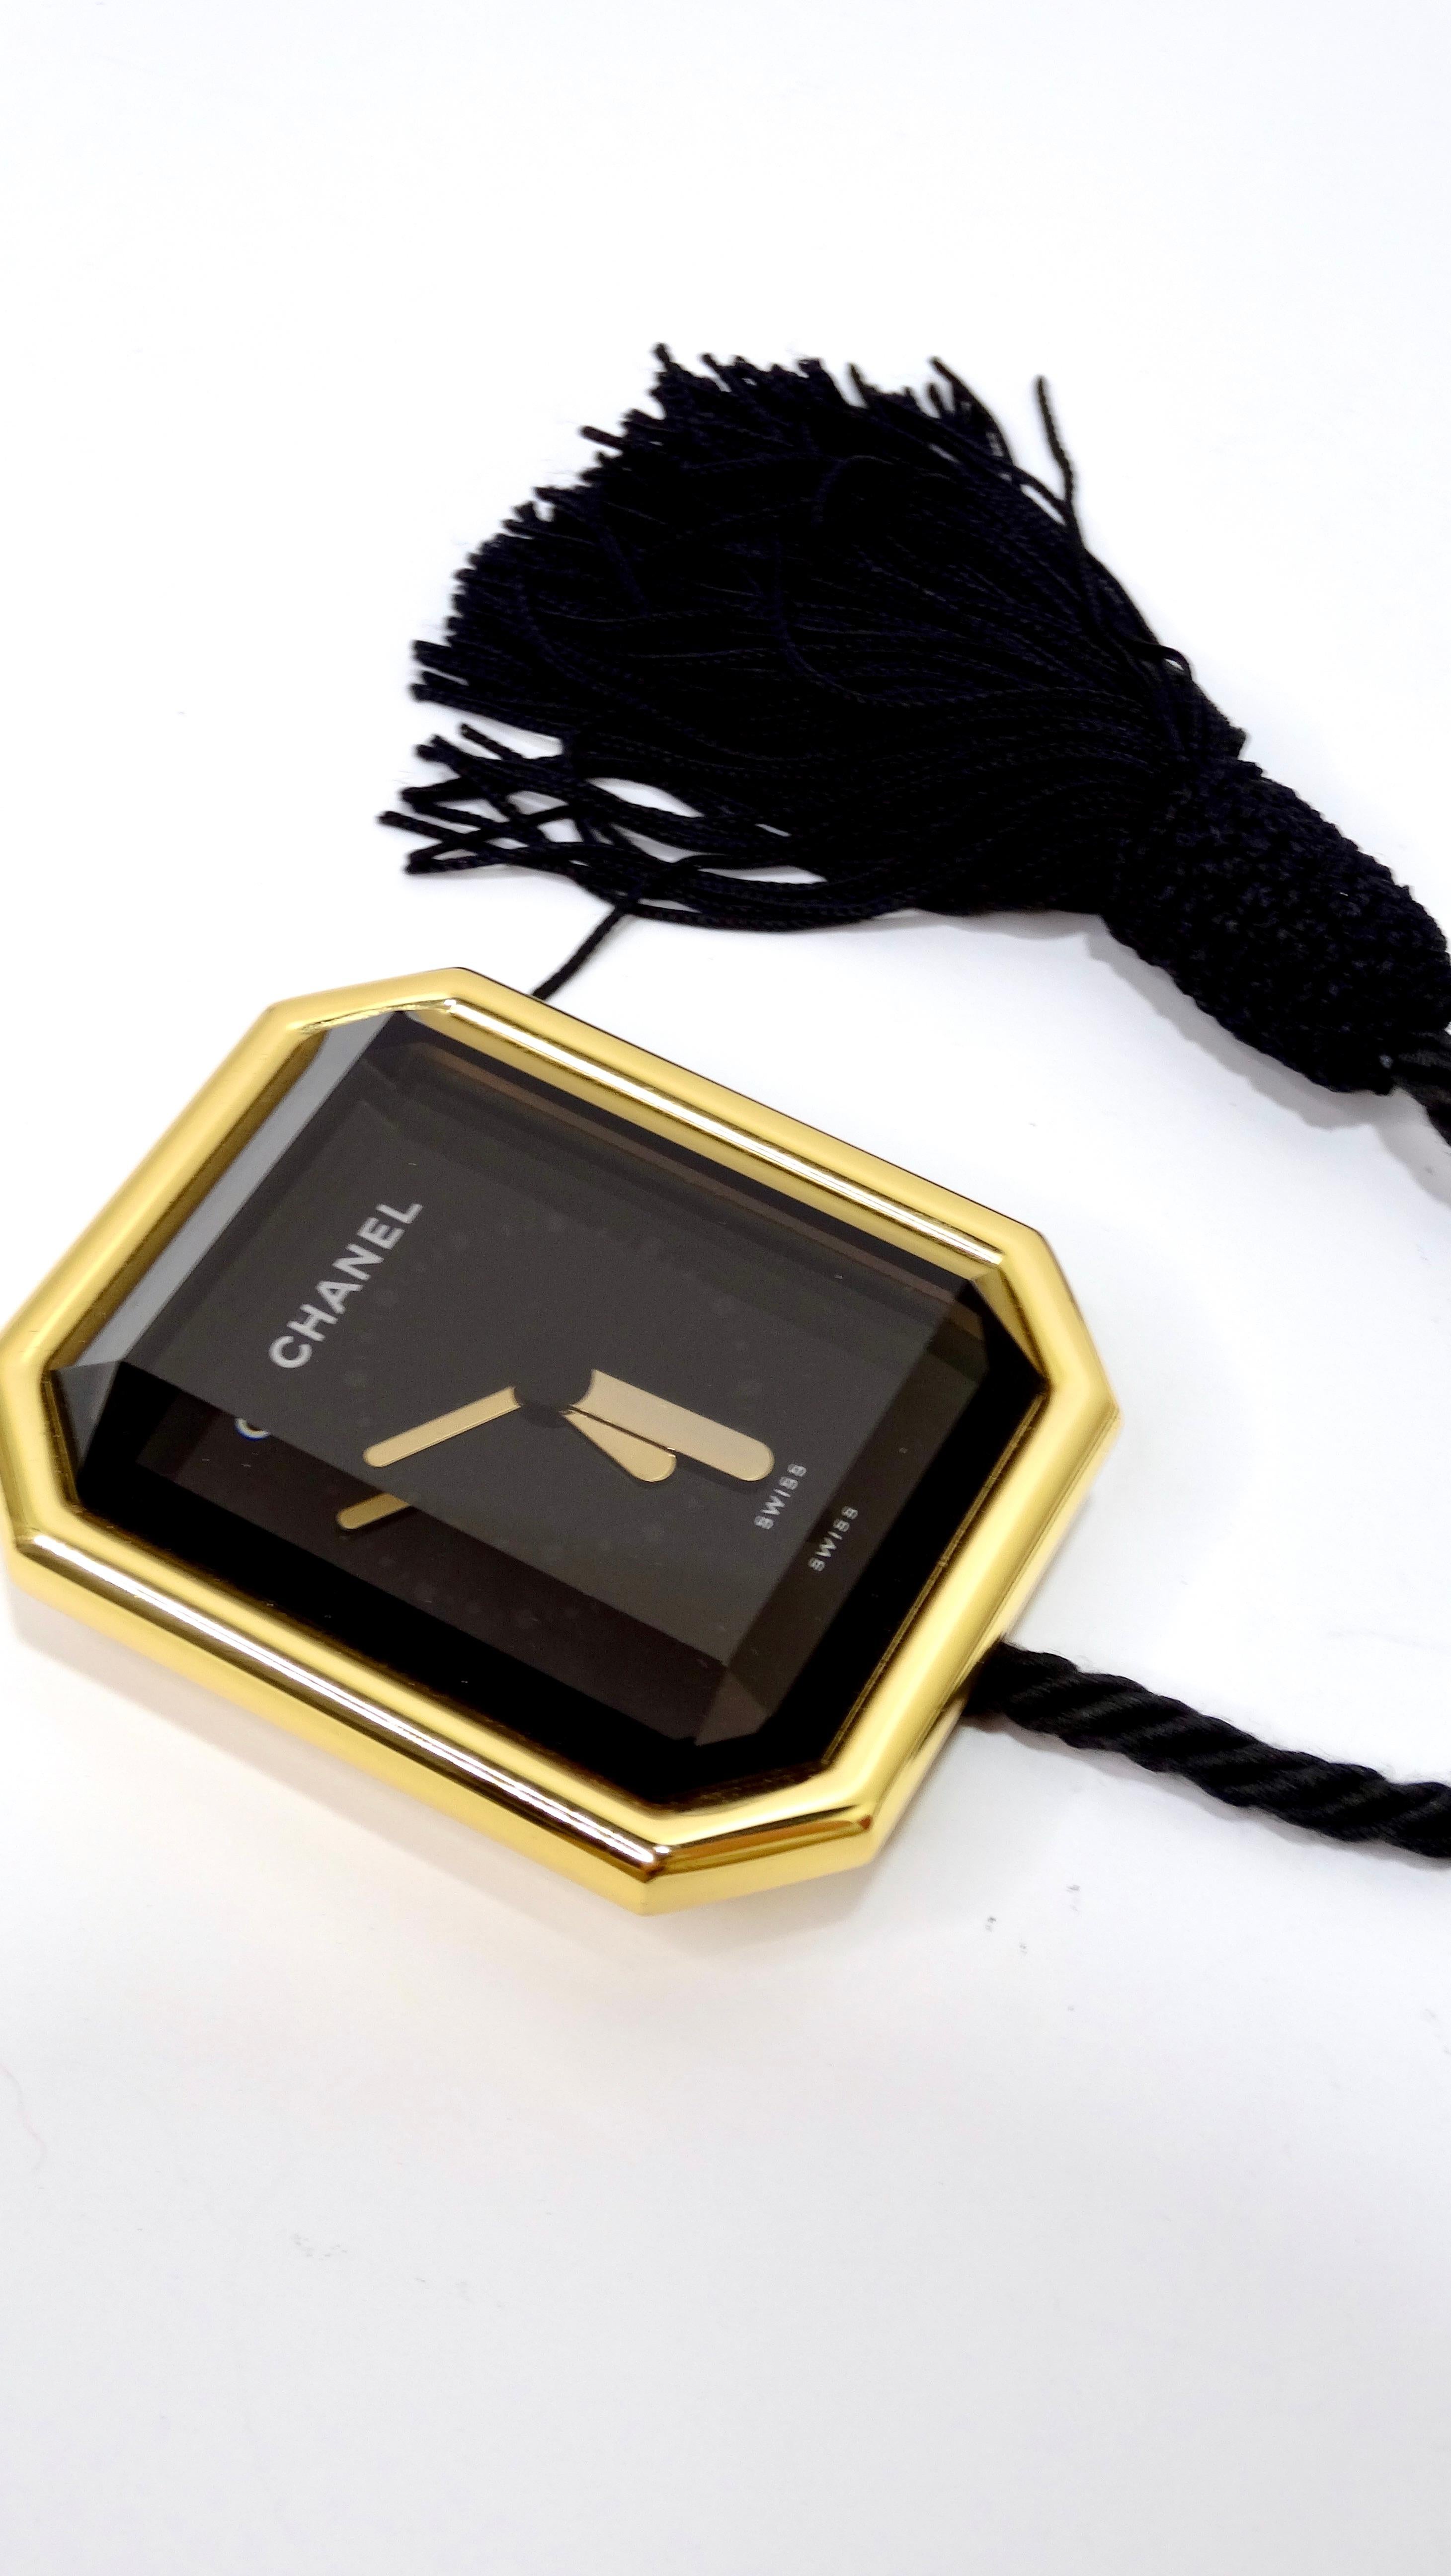 Get your hands on this ultra-rare piece of Chanel history! This was a limited edition collection put forth by Chanel in the late 1980's. Have you every seen something this sophisticated and beautiful? This is featured in a black and brilliant gold